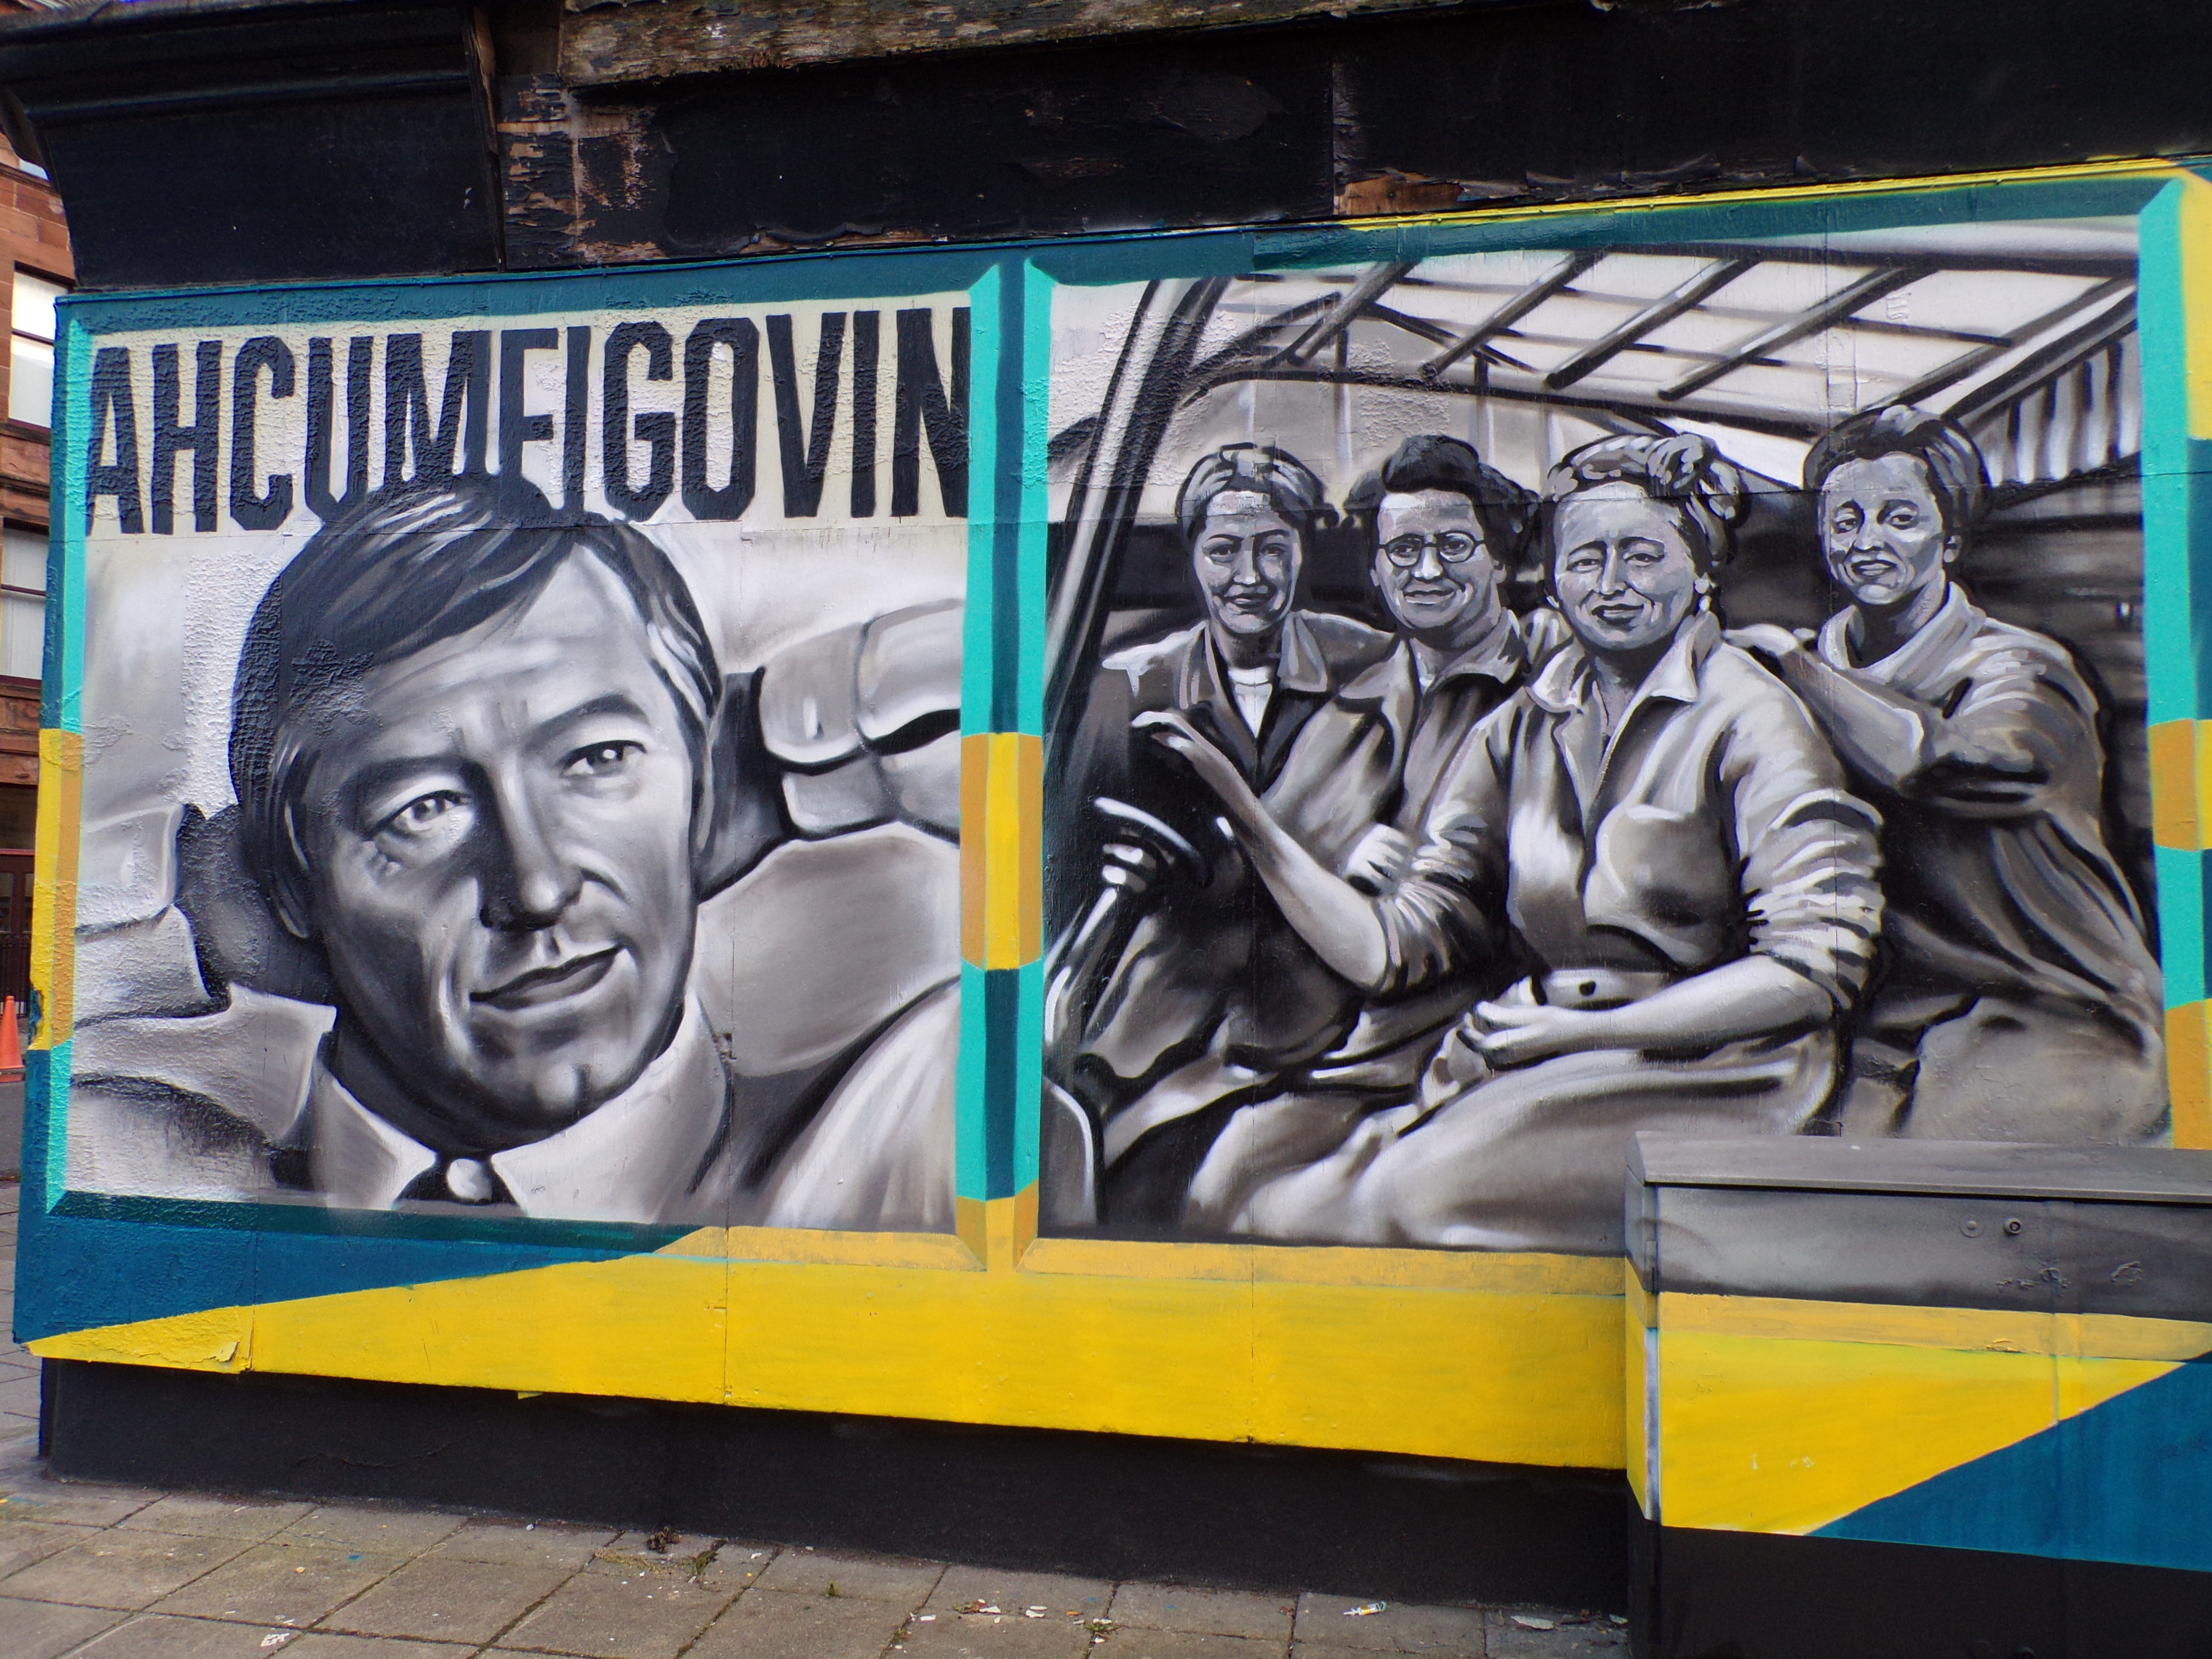 Another mural on the way for Govan thanks to Elderpark